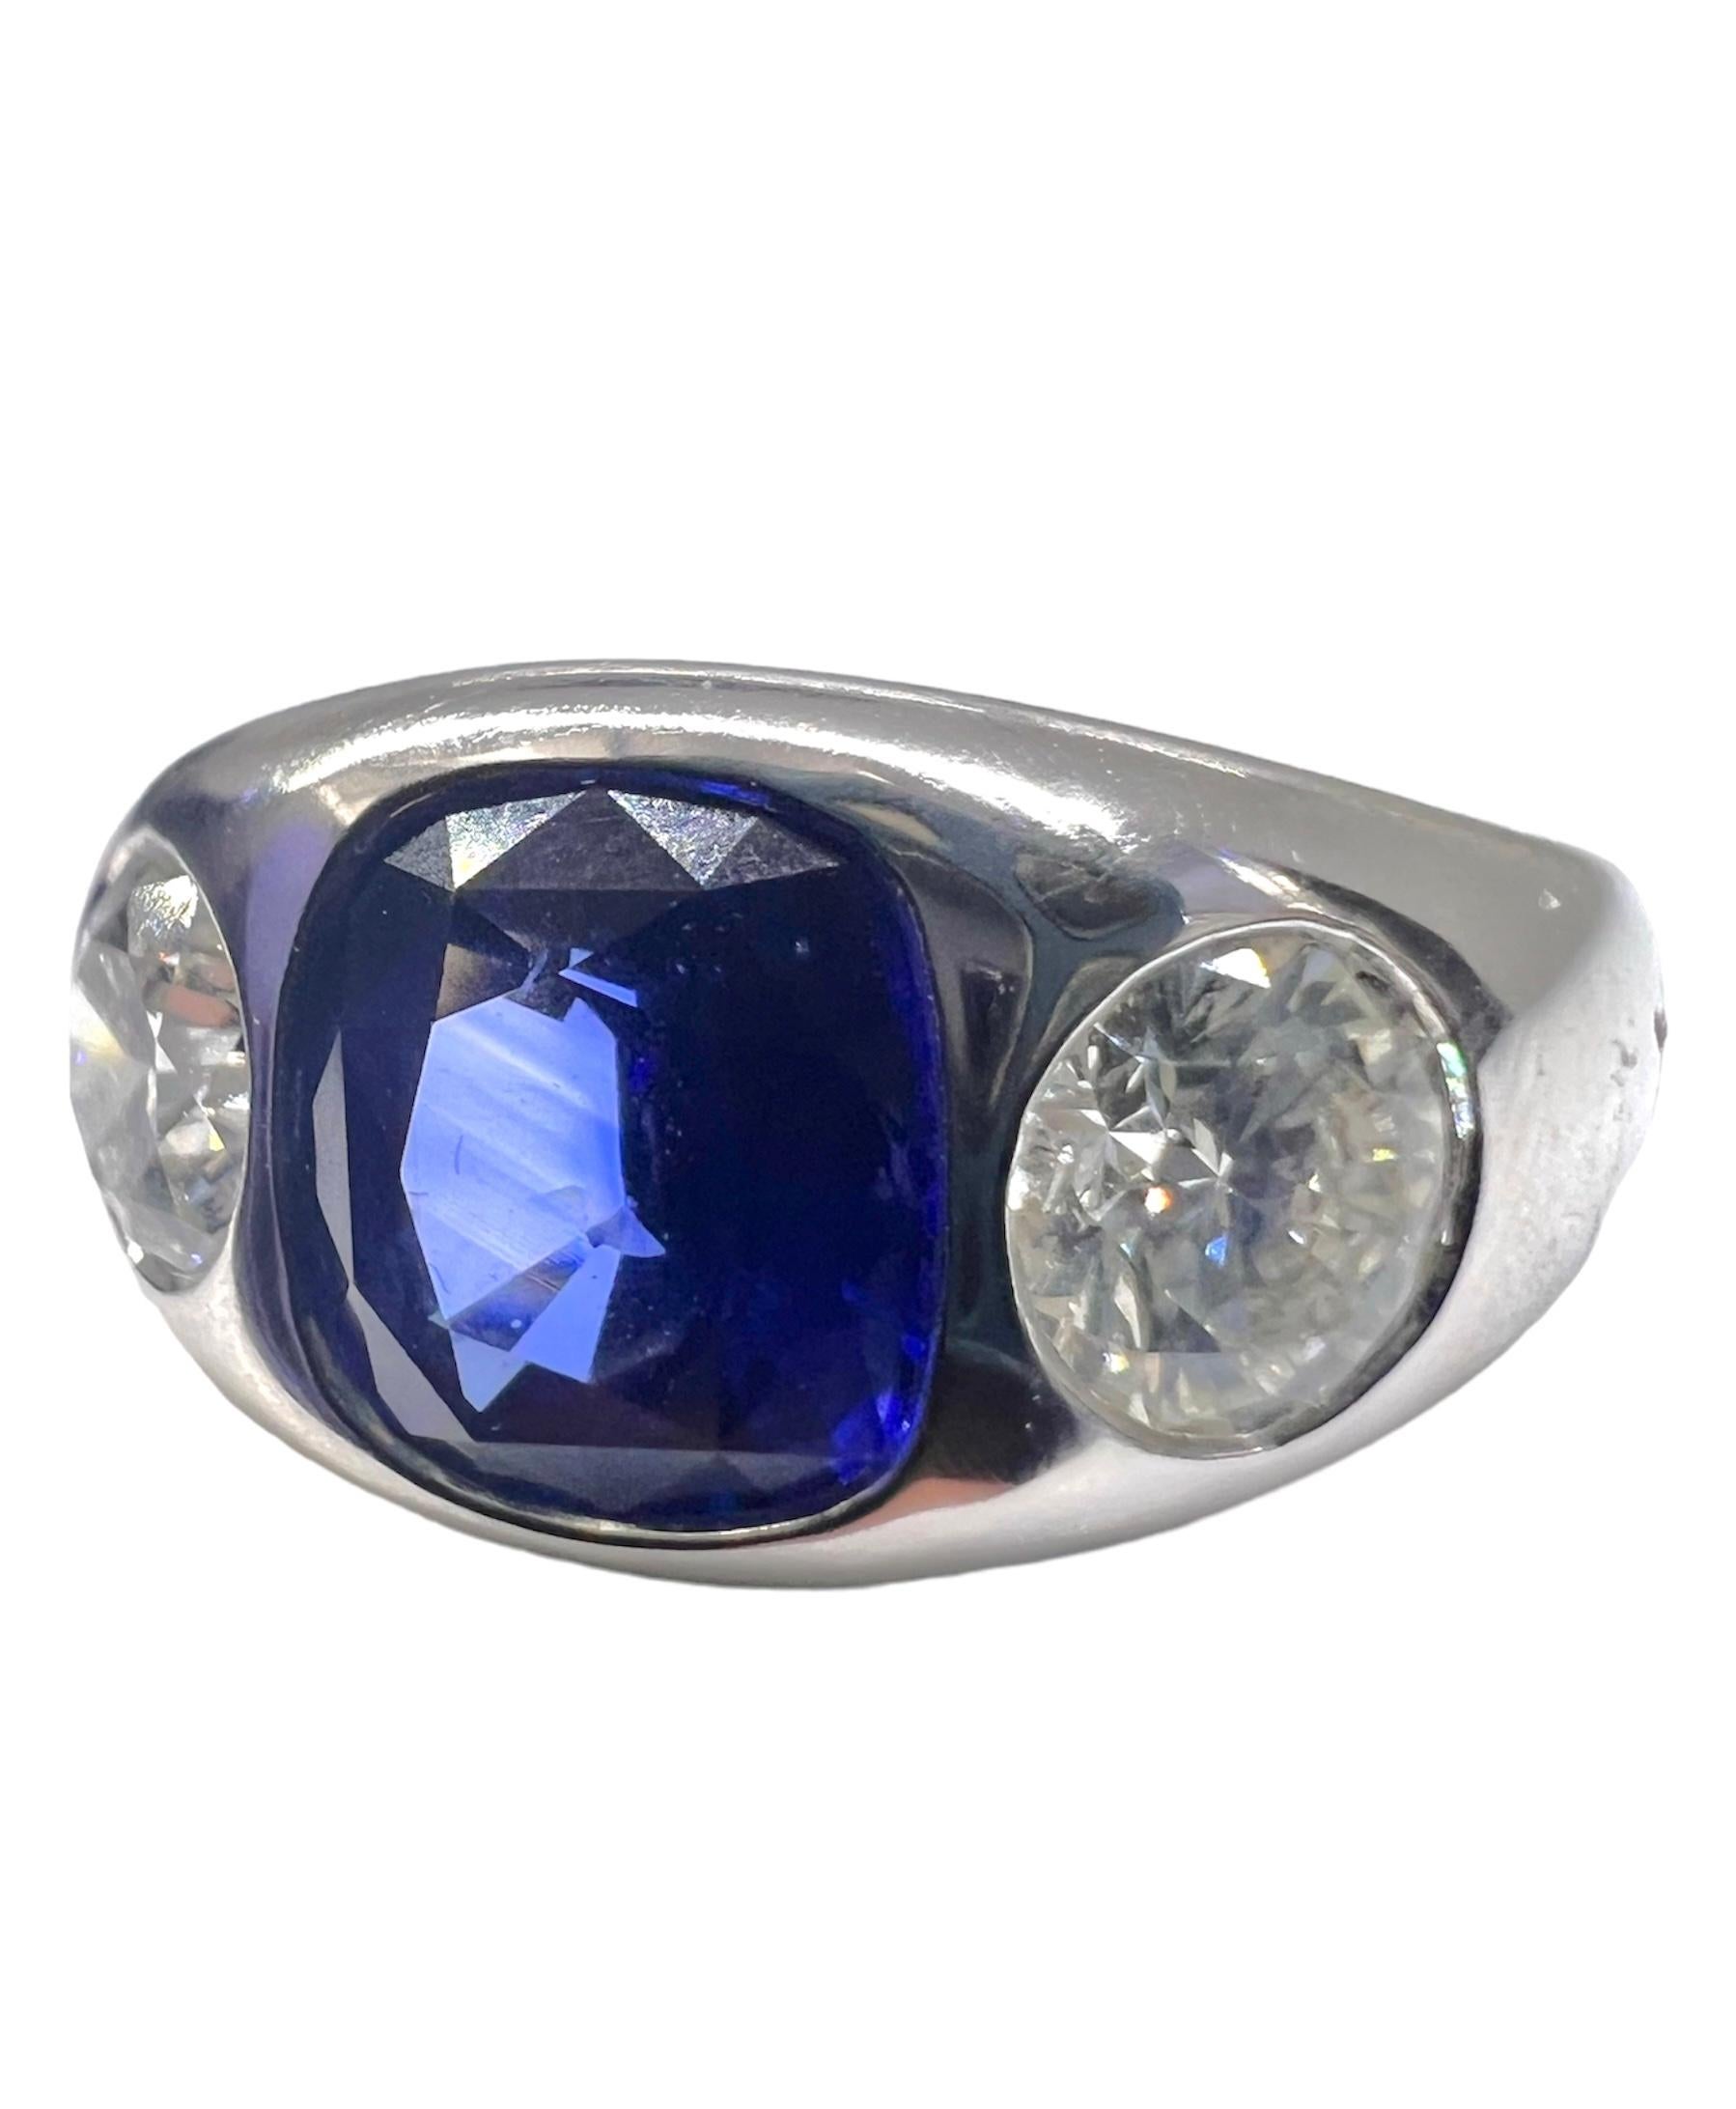 A triple stone gypsy ring with a GIA certified round diamonds that weighs 0.53 carat and 0.51 carat and cushion cut blue sapphire that weighs2.12 carat set in platinum.

Sophia D by Joseph Dardashti LTD has been known worldwide for 35 years and are